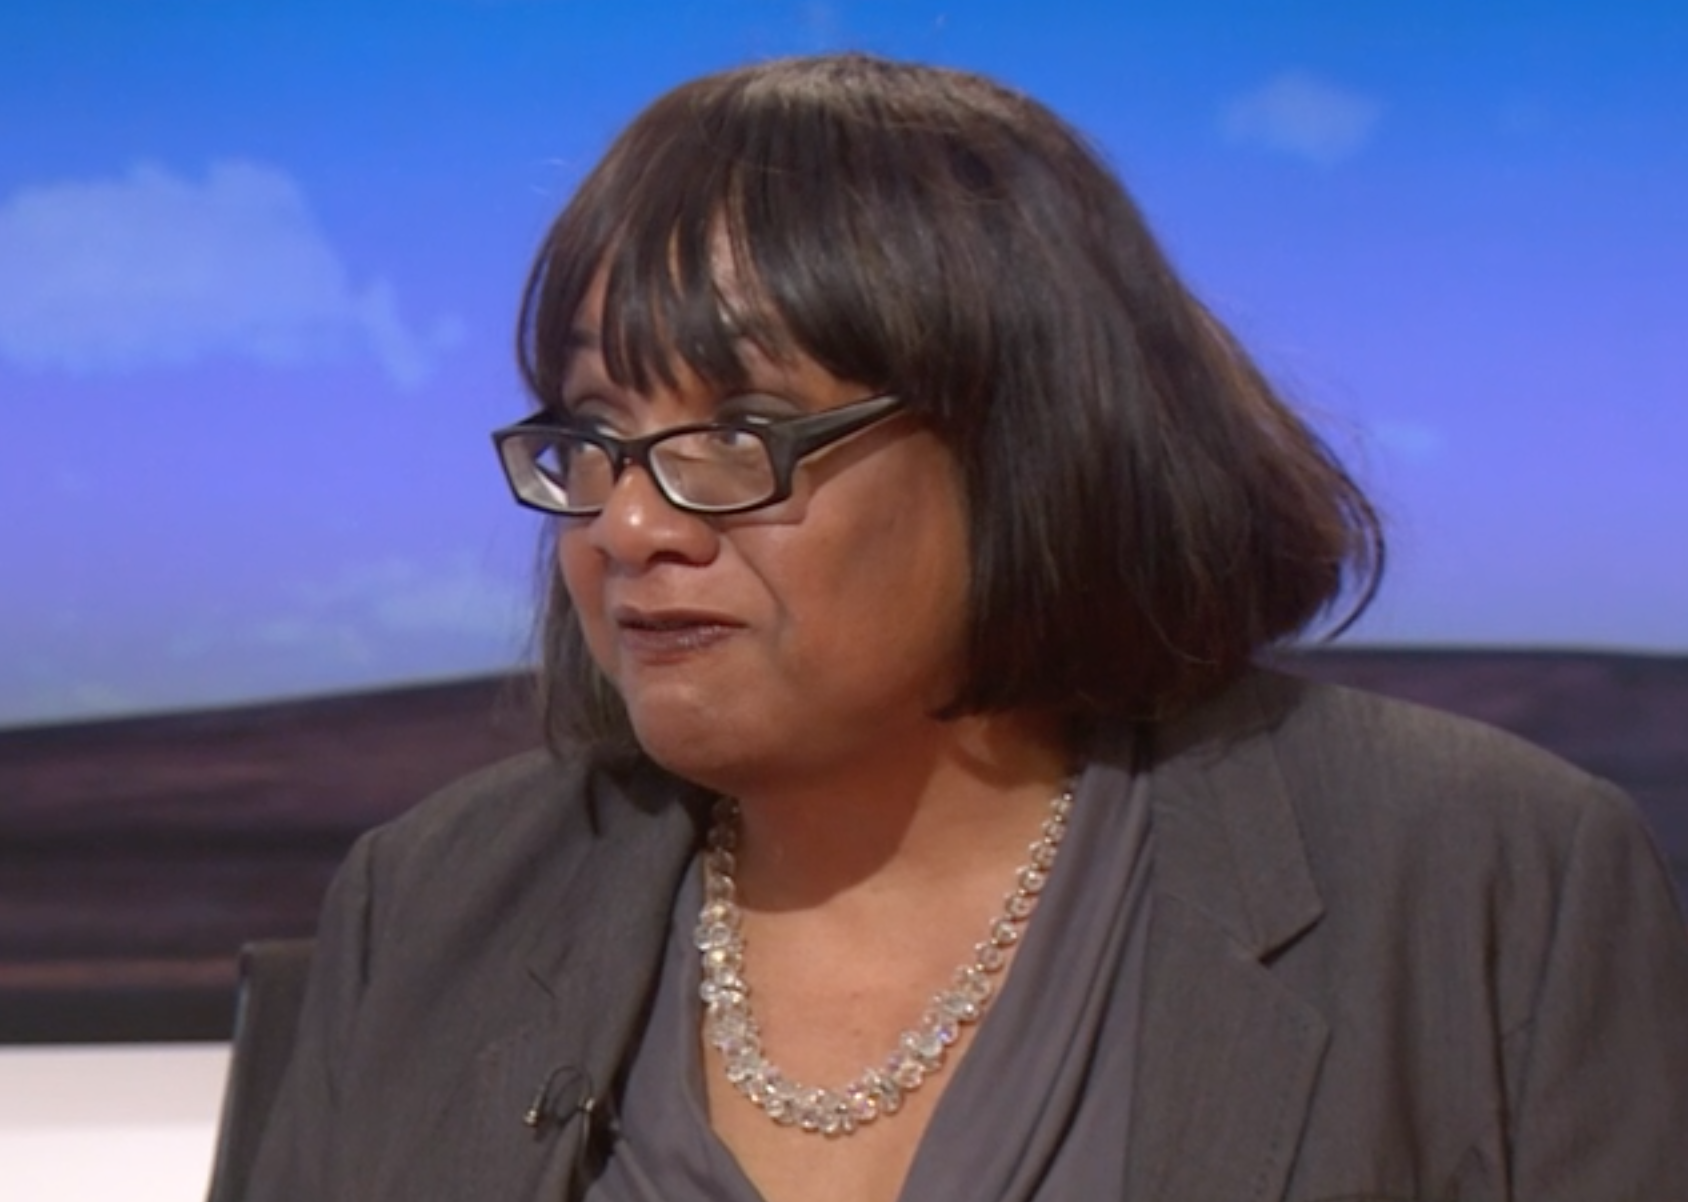 Diane Abbott performed badly in various media appearances, before revealing she had been struggling illness